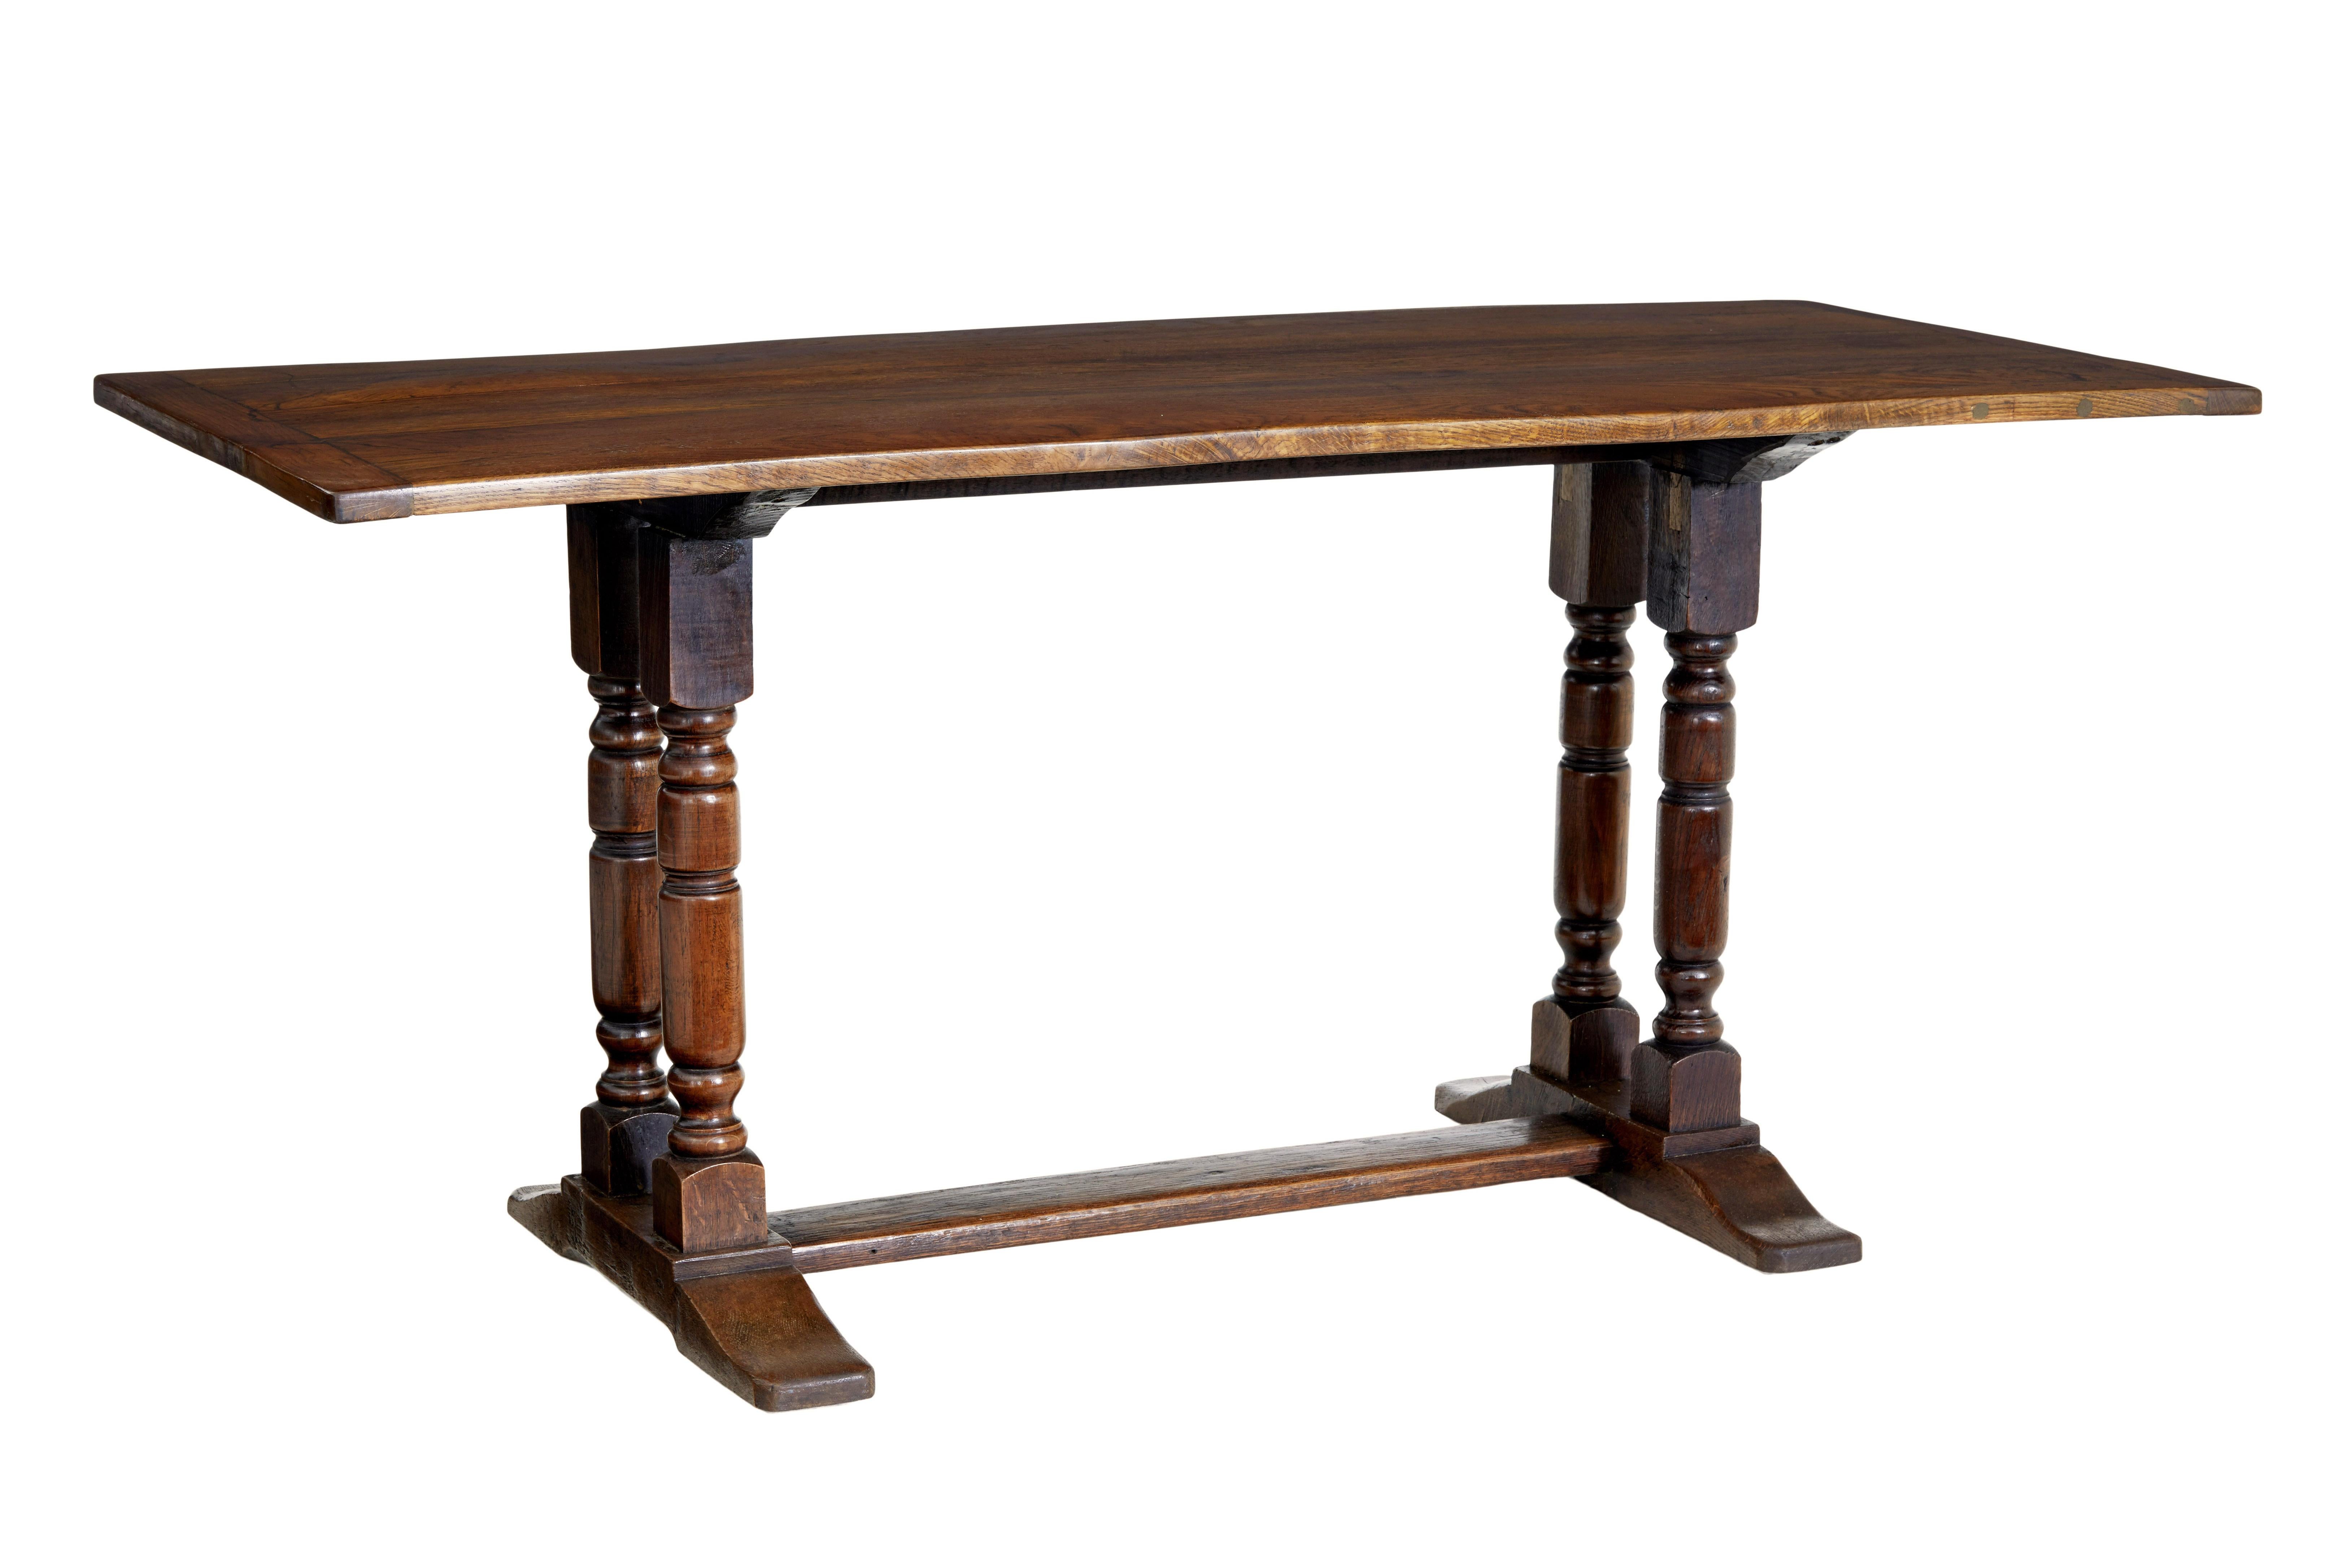 Rustic 19th century oak dining table circa 1850.

Old english small rectory style table made in oak.  4 plank oak top with cleated ends.  Standing on 2 turned supports with sledge feet united by a floor level stretcher.

This table would make an